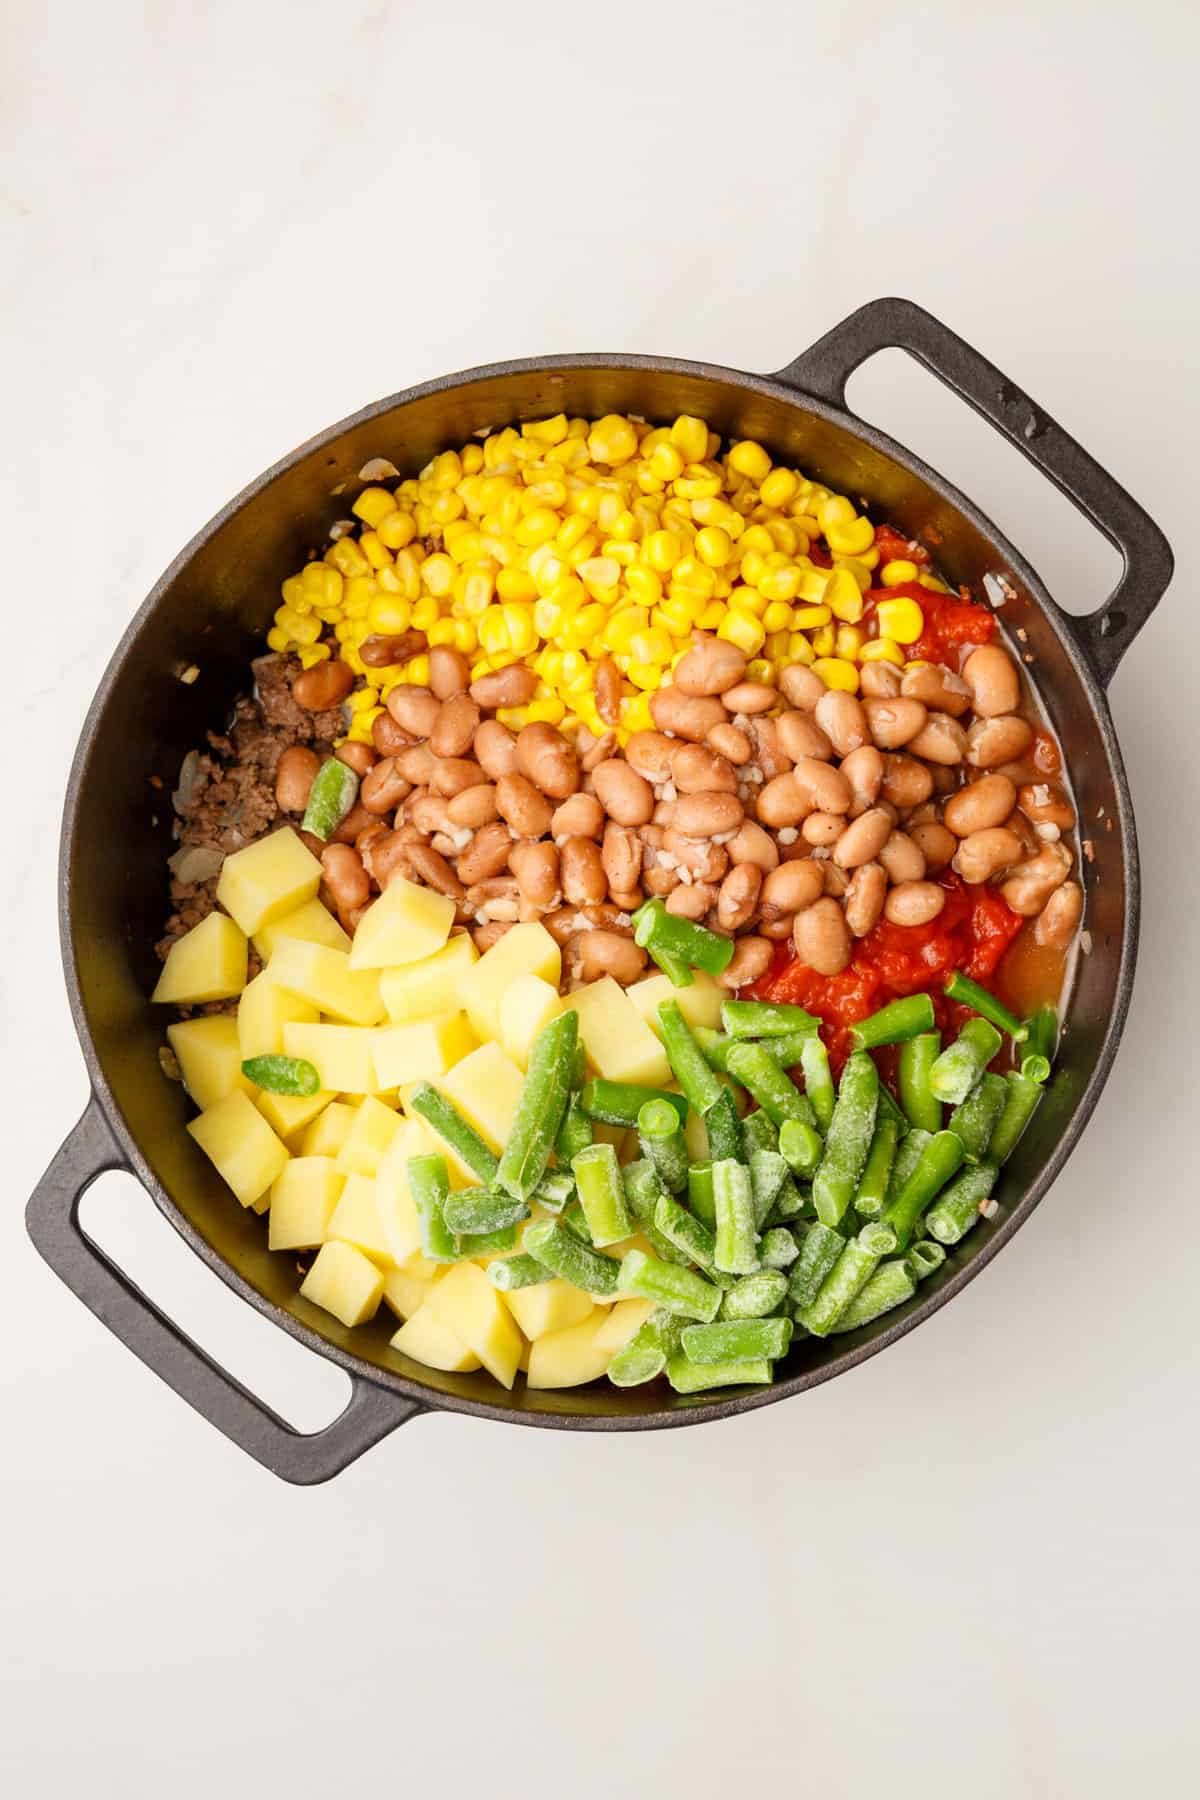 mixed vegetables, pinto beans, cooked ground beef, onion and garlic, and cubed potatoes in a large cast iron dutch oven